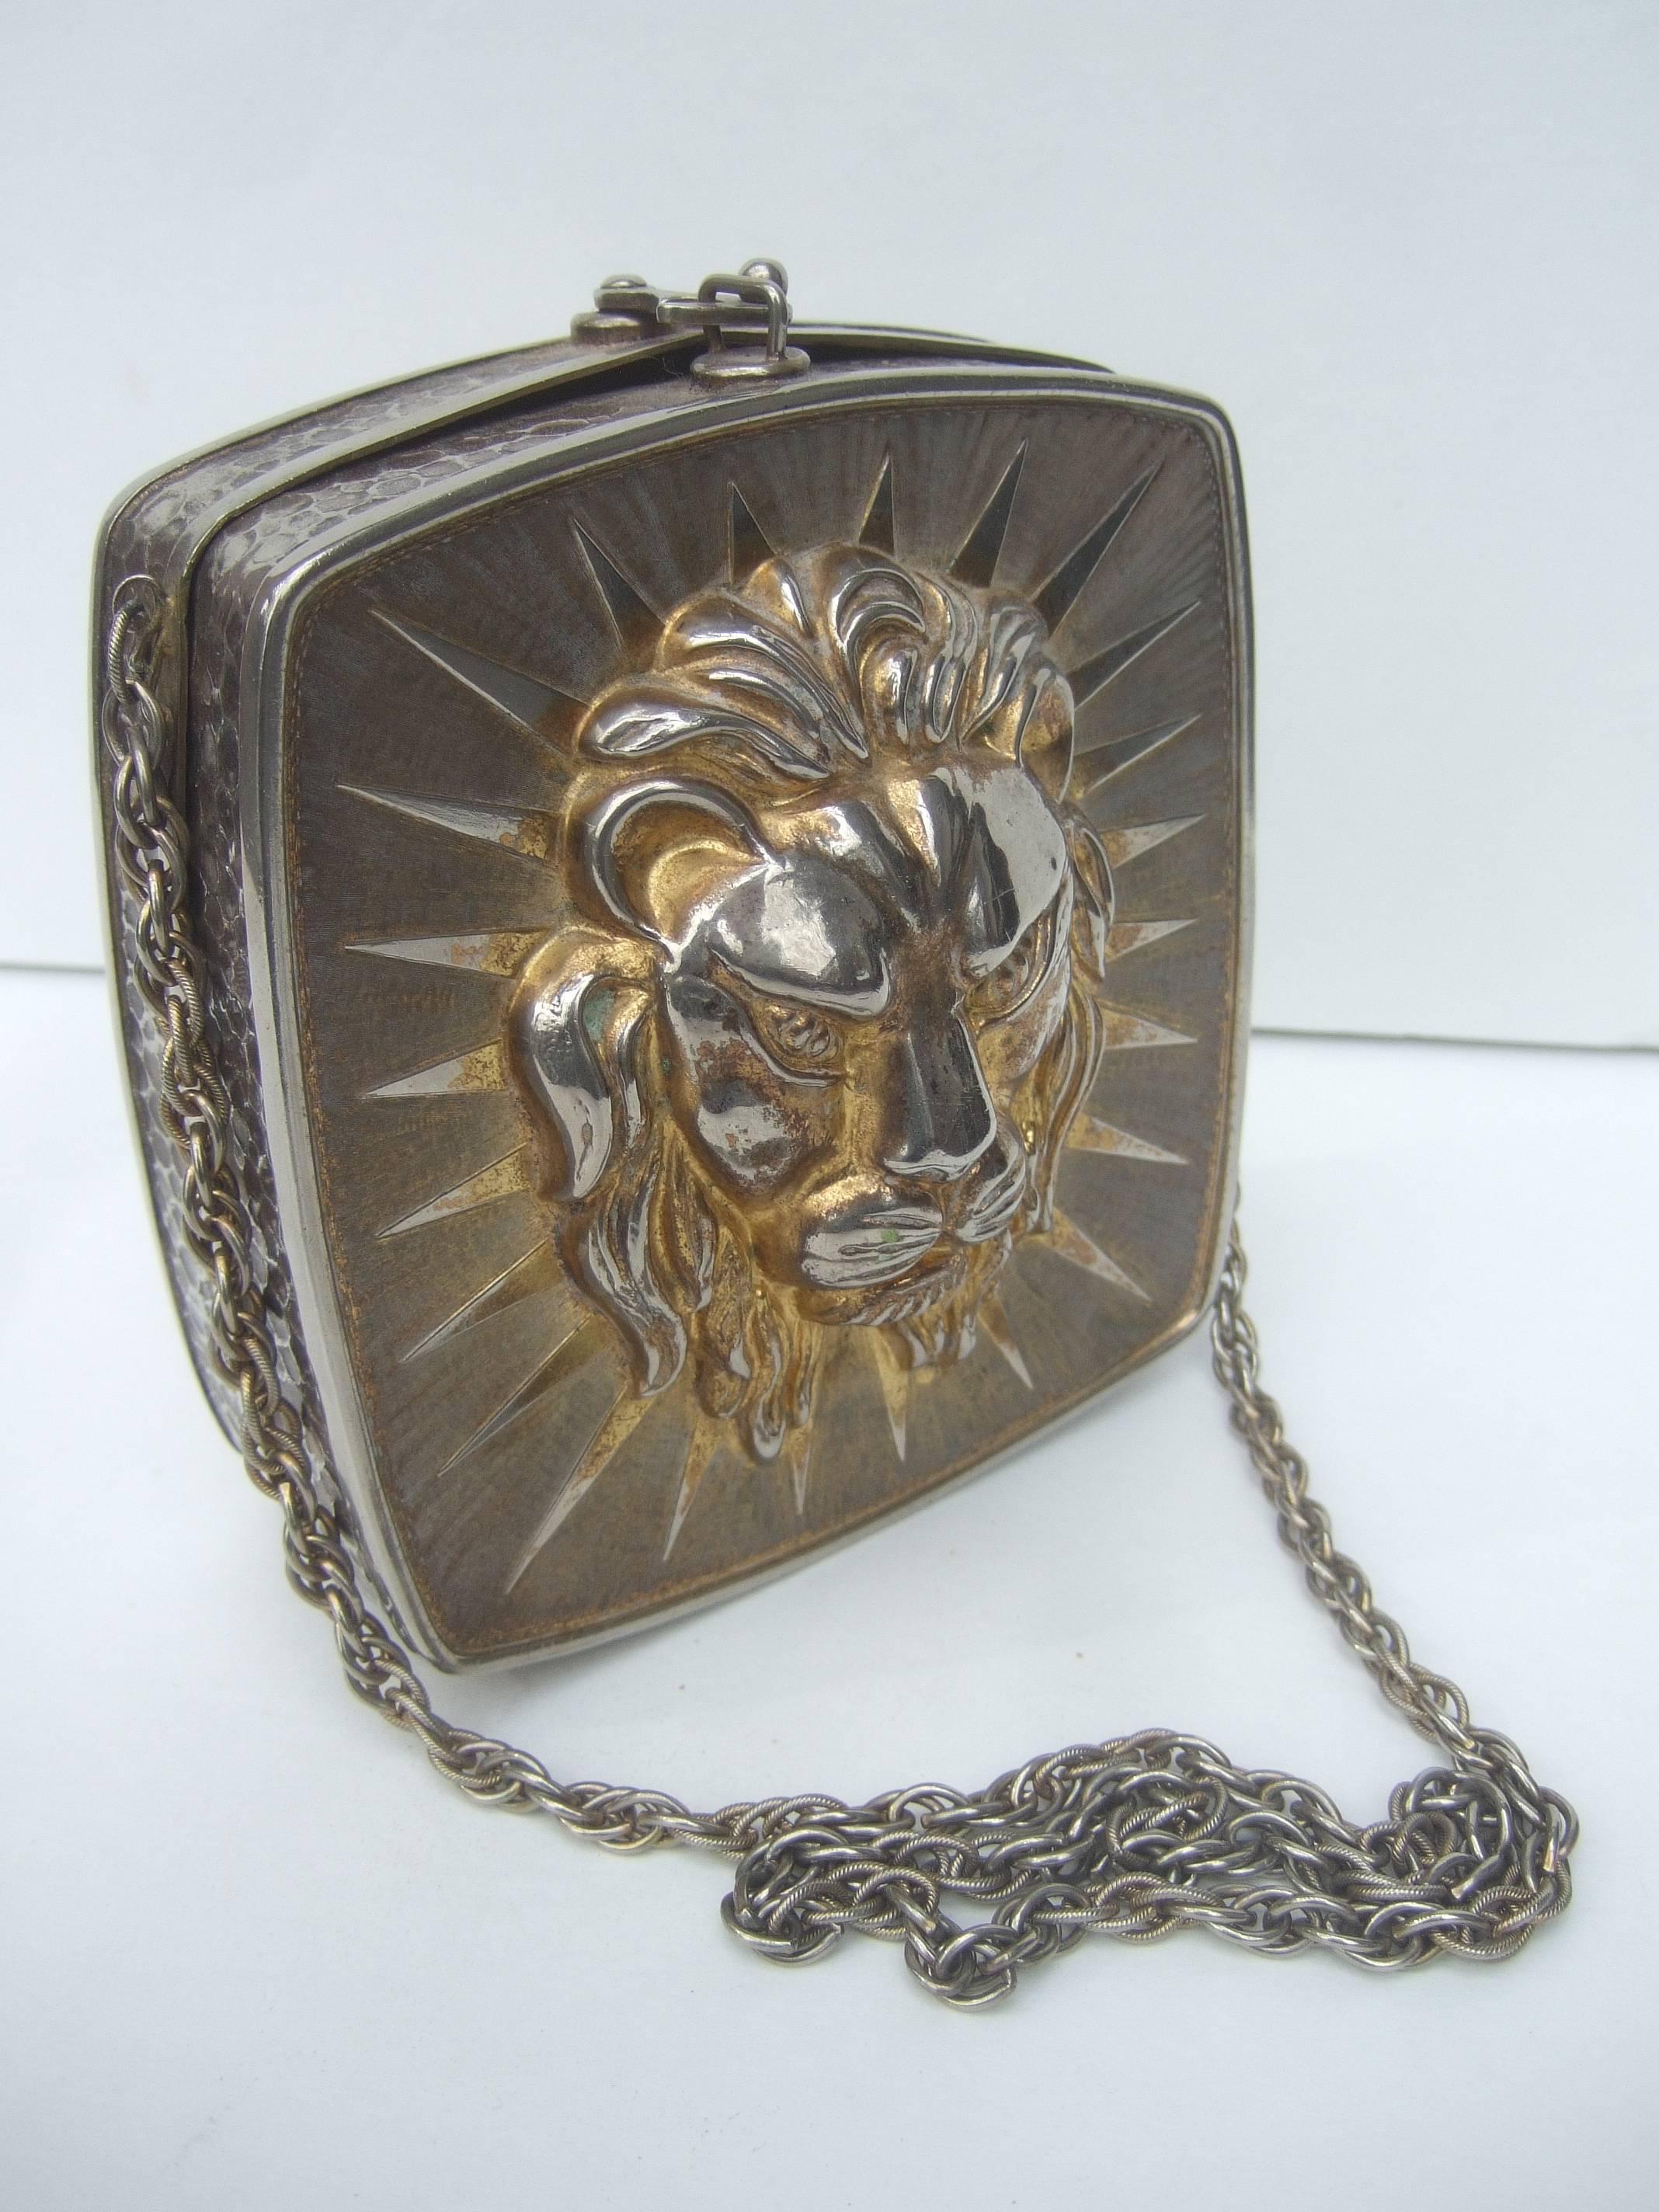 Women's Ornate Metal Lion Emblem Evening Bag Made in Italy c 1970s